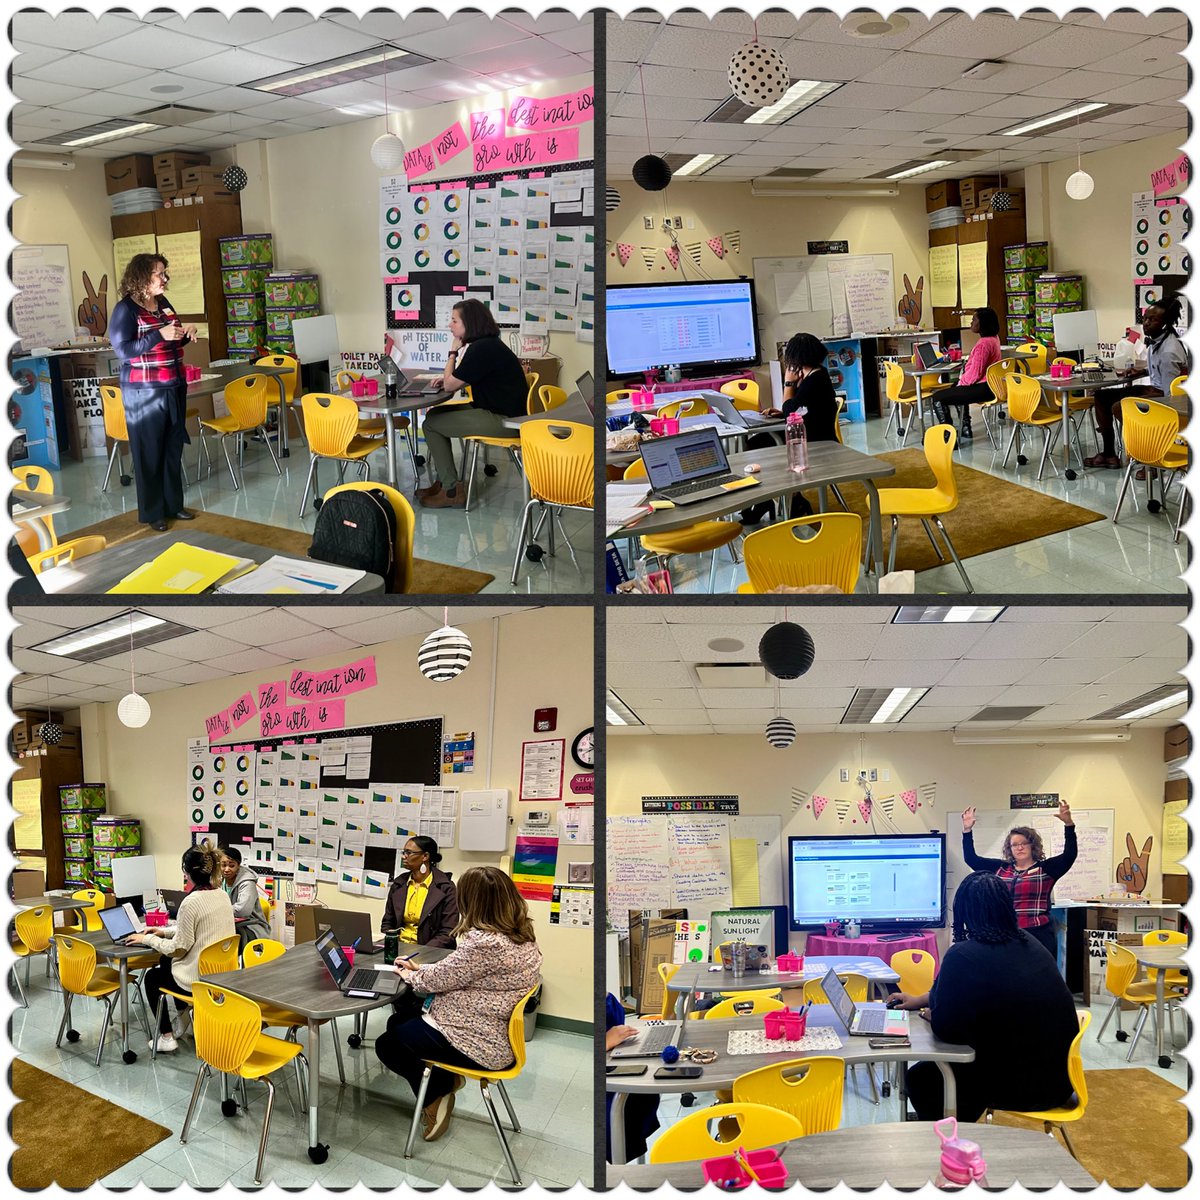 Another great day of PD learning in the land of the Einsteins. Growing stronger in our craft together for our students! Thankful for our AMIRA Coach. The science of READING meets AI. Children who read CAN and WILL lead. @AlexIIEinsteins @BibbSchools